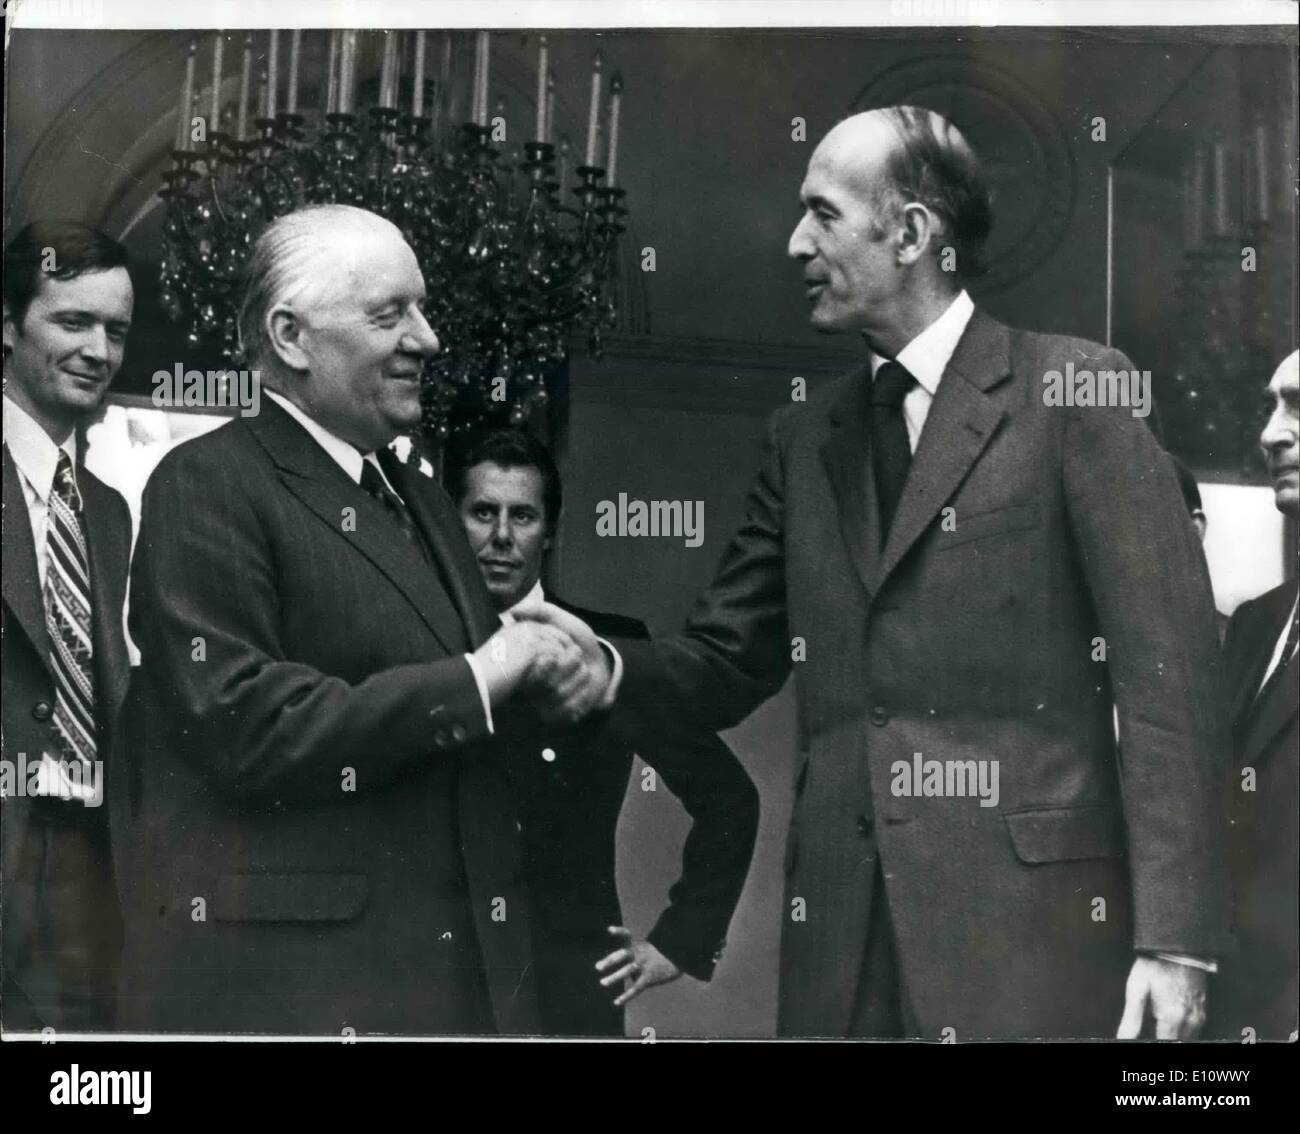 May 05, 1974 - Giscard Visits The Elysee Palace: The newly elected French President Valery Giscard D'Estaing (right), shaking hands with M. Alain Poher, the interim president, after visiting him at the Elysee Palace in Paris today. Stock Photo